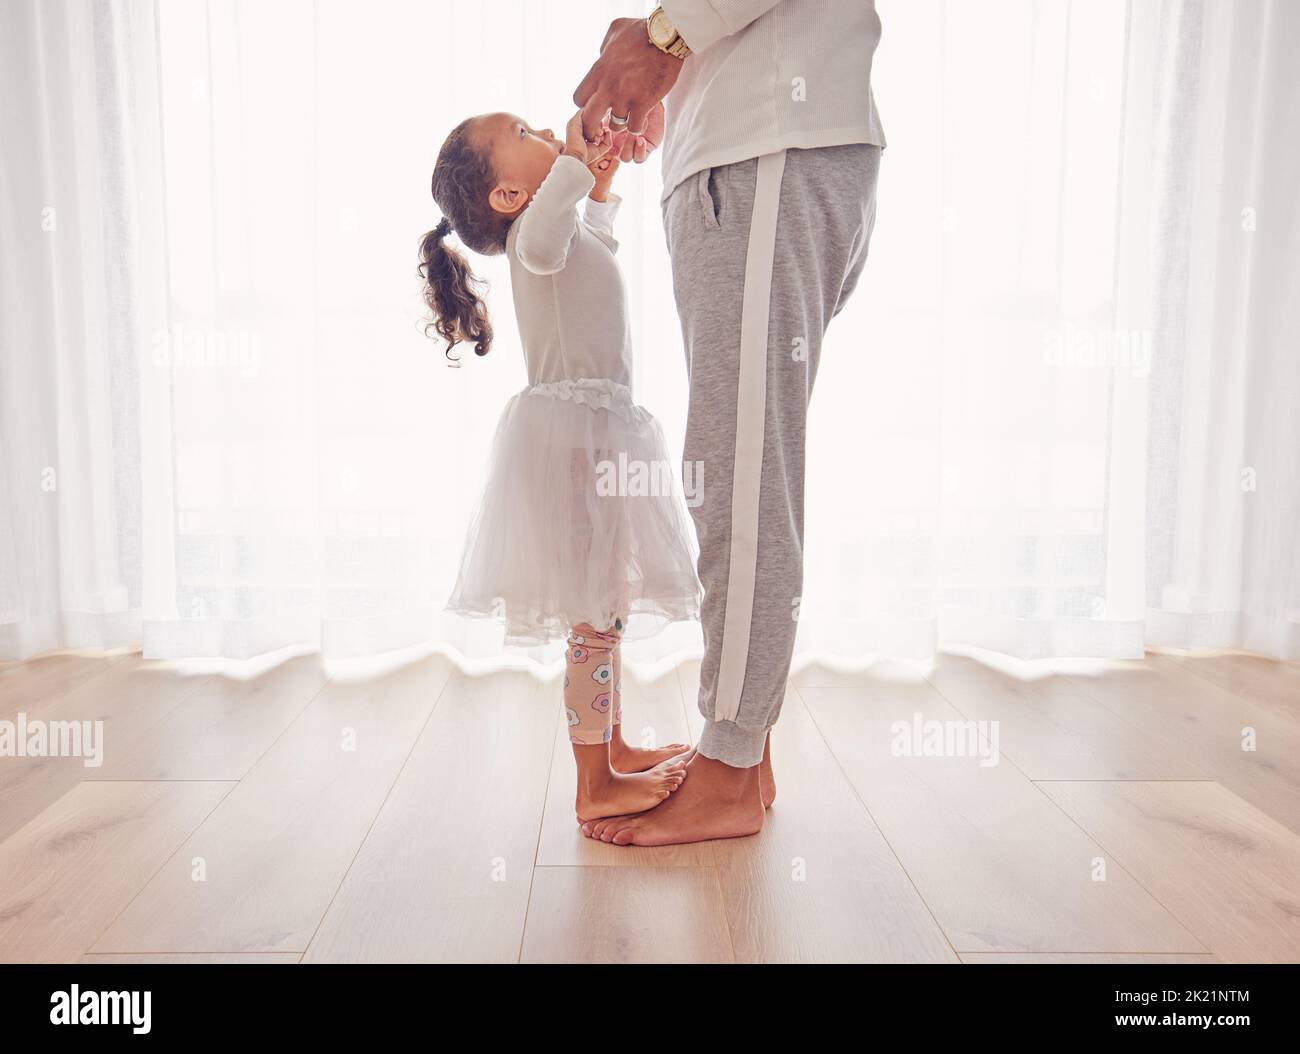 Family, dance and daughter on dad feet together on floor of interior for happiness, childhood and bonding. Care, love and youth with father dancing Stock Photo